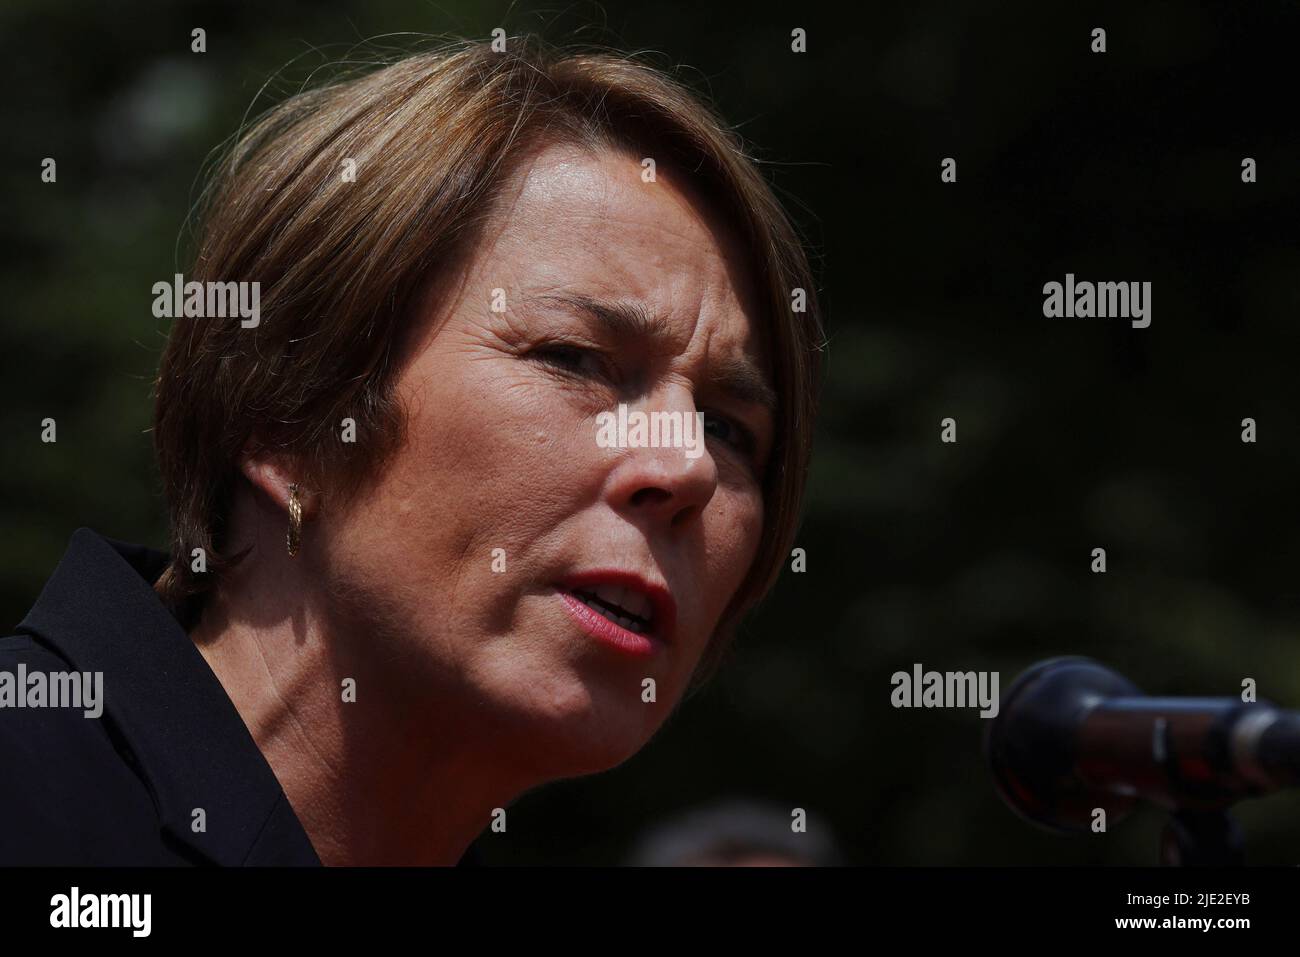 Massachusetts Attorney General and Democratic candidate for Governor Maura Healey speaks to abortion rights demonstrators gathered at the Massachusetts State House after the United States Supreme Court ruled in the Dobbs v. Women's Health Organization abortion case, overturning the landmark Roe v Wade abortion decision, in Boston, Massachusetts, U.S., June 24, 2022.   REUTERS/Brian Snyder Stock Photo